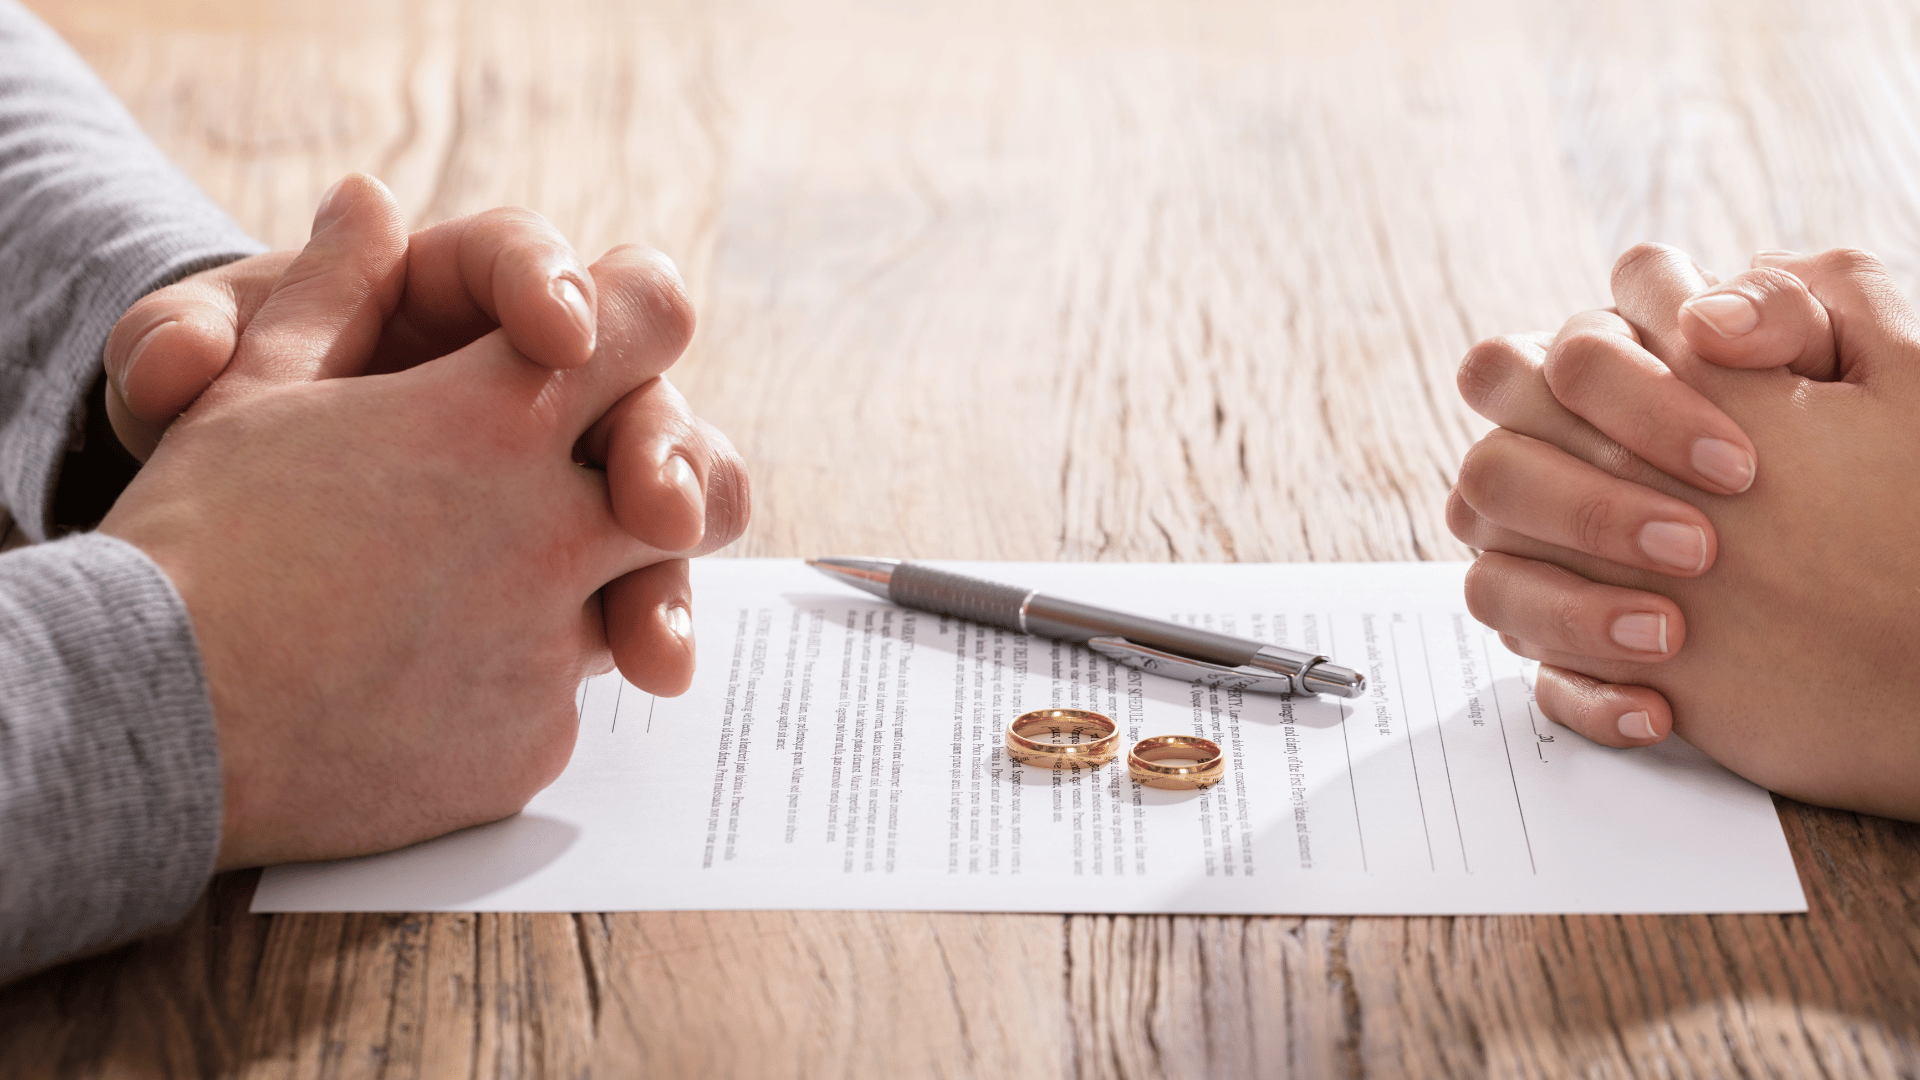 separating couple's hands on opposing sides of a table. Divorce Lawyer Penrith. Family solicitors Sydney. Family Lawyers Sydney.